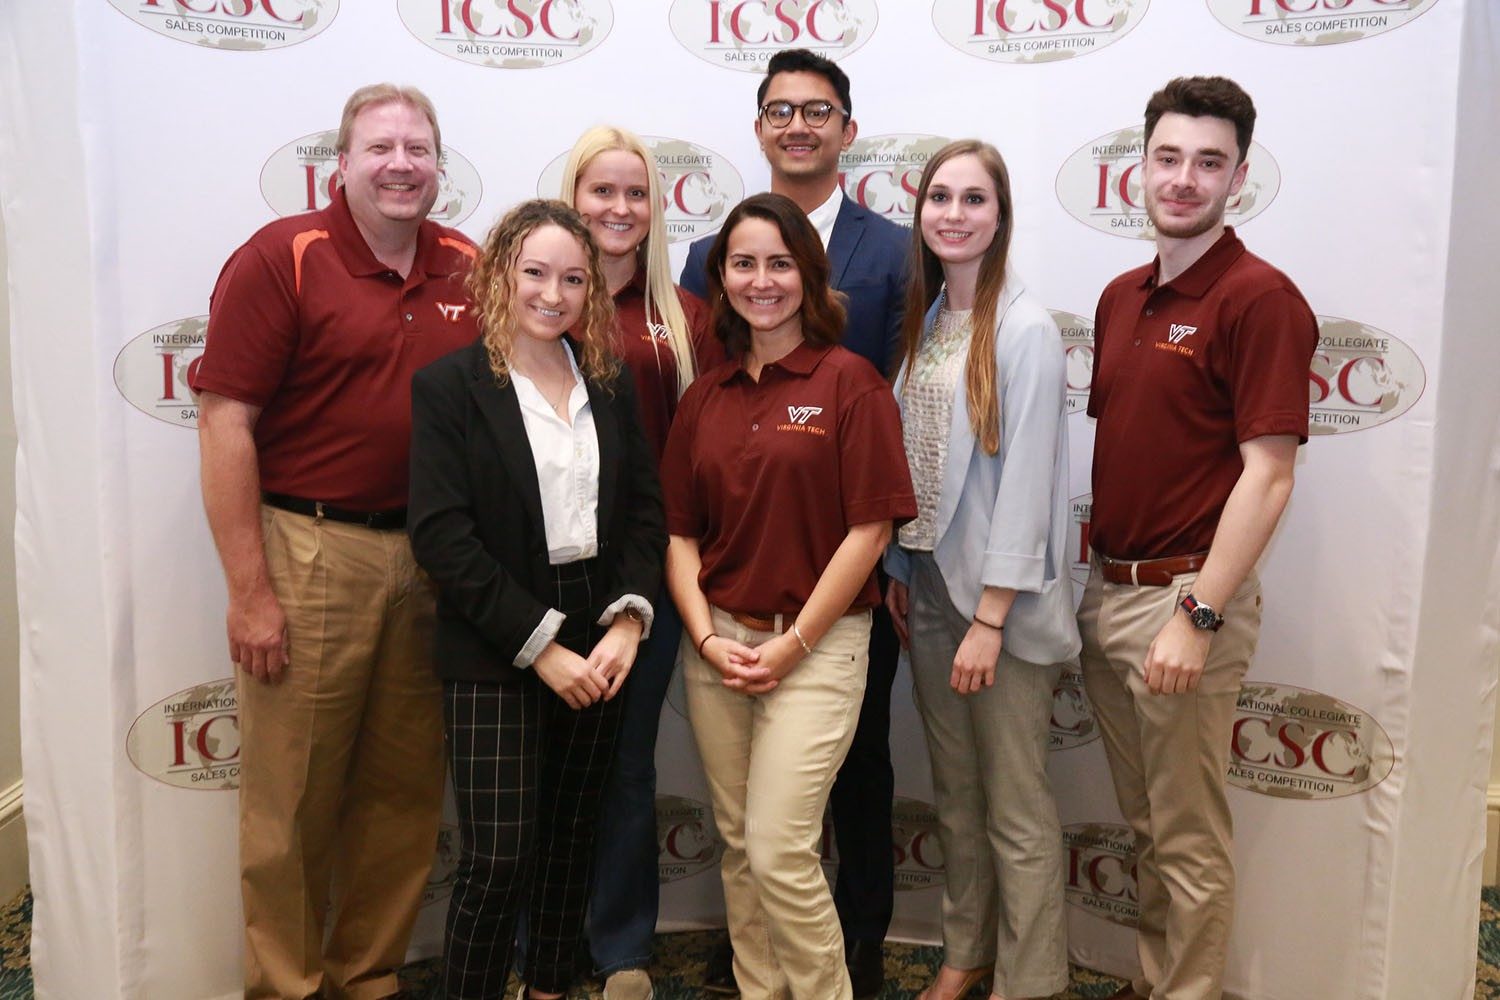 Congratulations to our Sales Competition Team for competing at the 2019 International Collegiate Sales Competition held in Orlando. They competed against students from 70 schools in the role play and speed sell categories. Pictured above (from left to right): Brian Collins (Director of the Sales Center), Morgan Curington, Taylor Buckner, Monica Hillison (Instructor), Shashwot KC, Carrie Rock, and Zach Treiber.